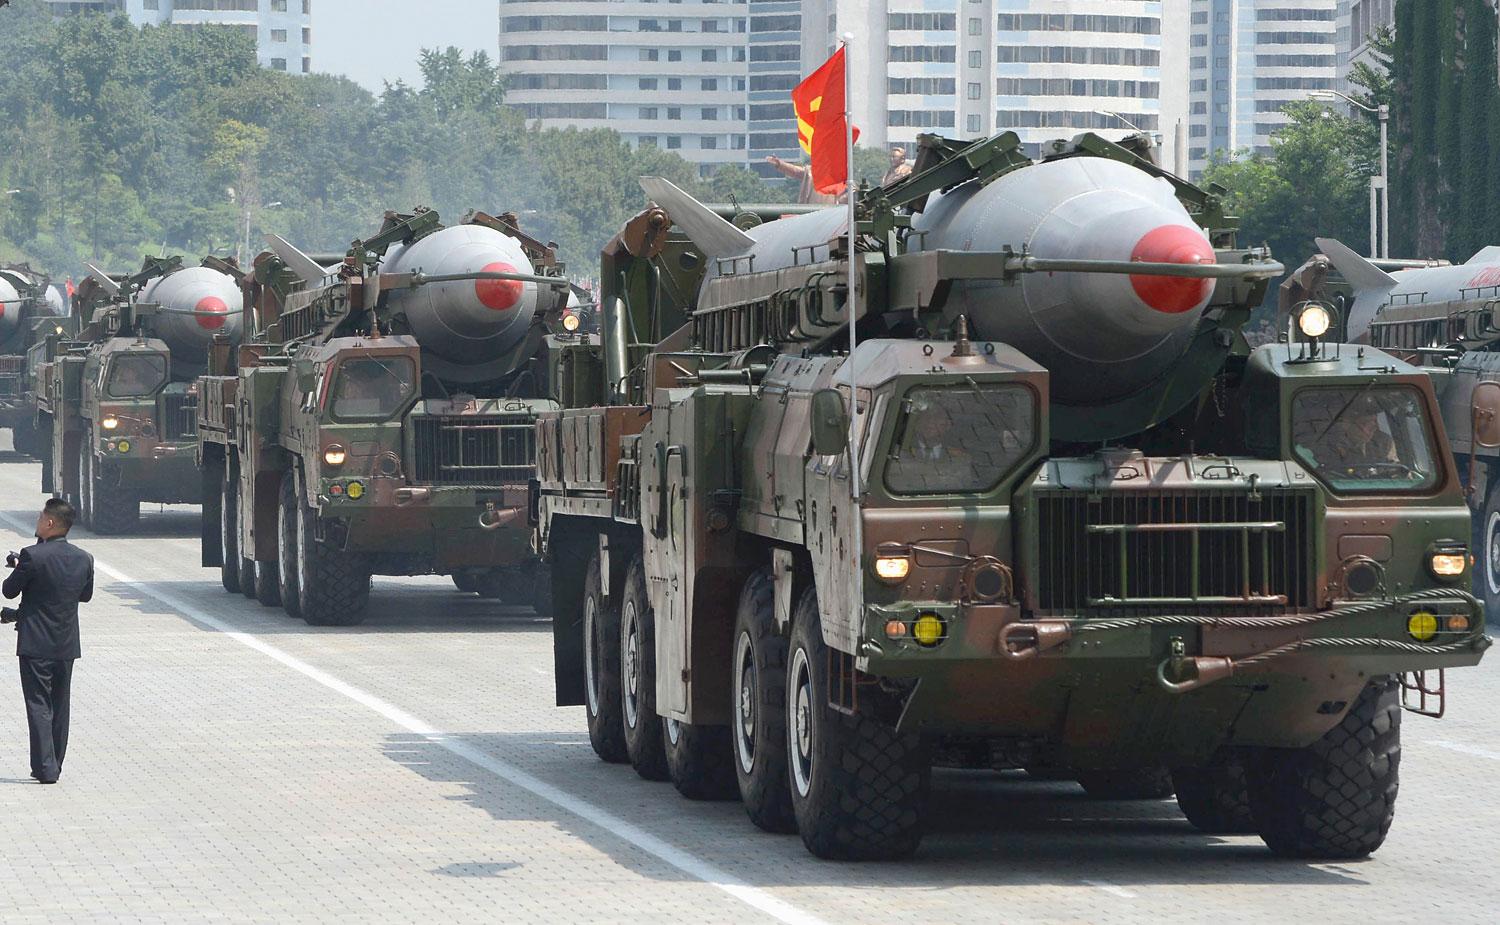 In this July, 2013 photo, military trucks carry Rodong missiles during a military parade at Kim Il Sung Square in Pyongyang. (Kyodo News/AP)